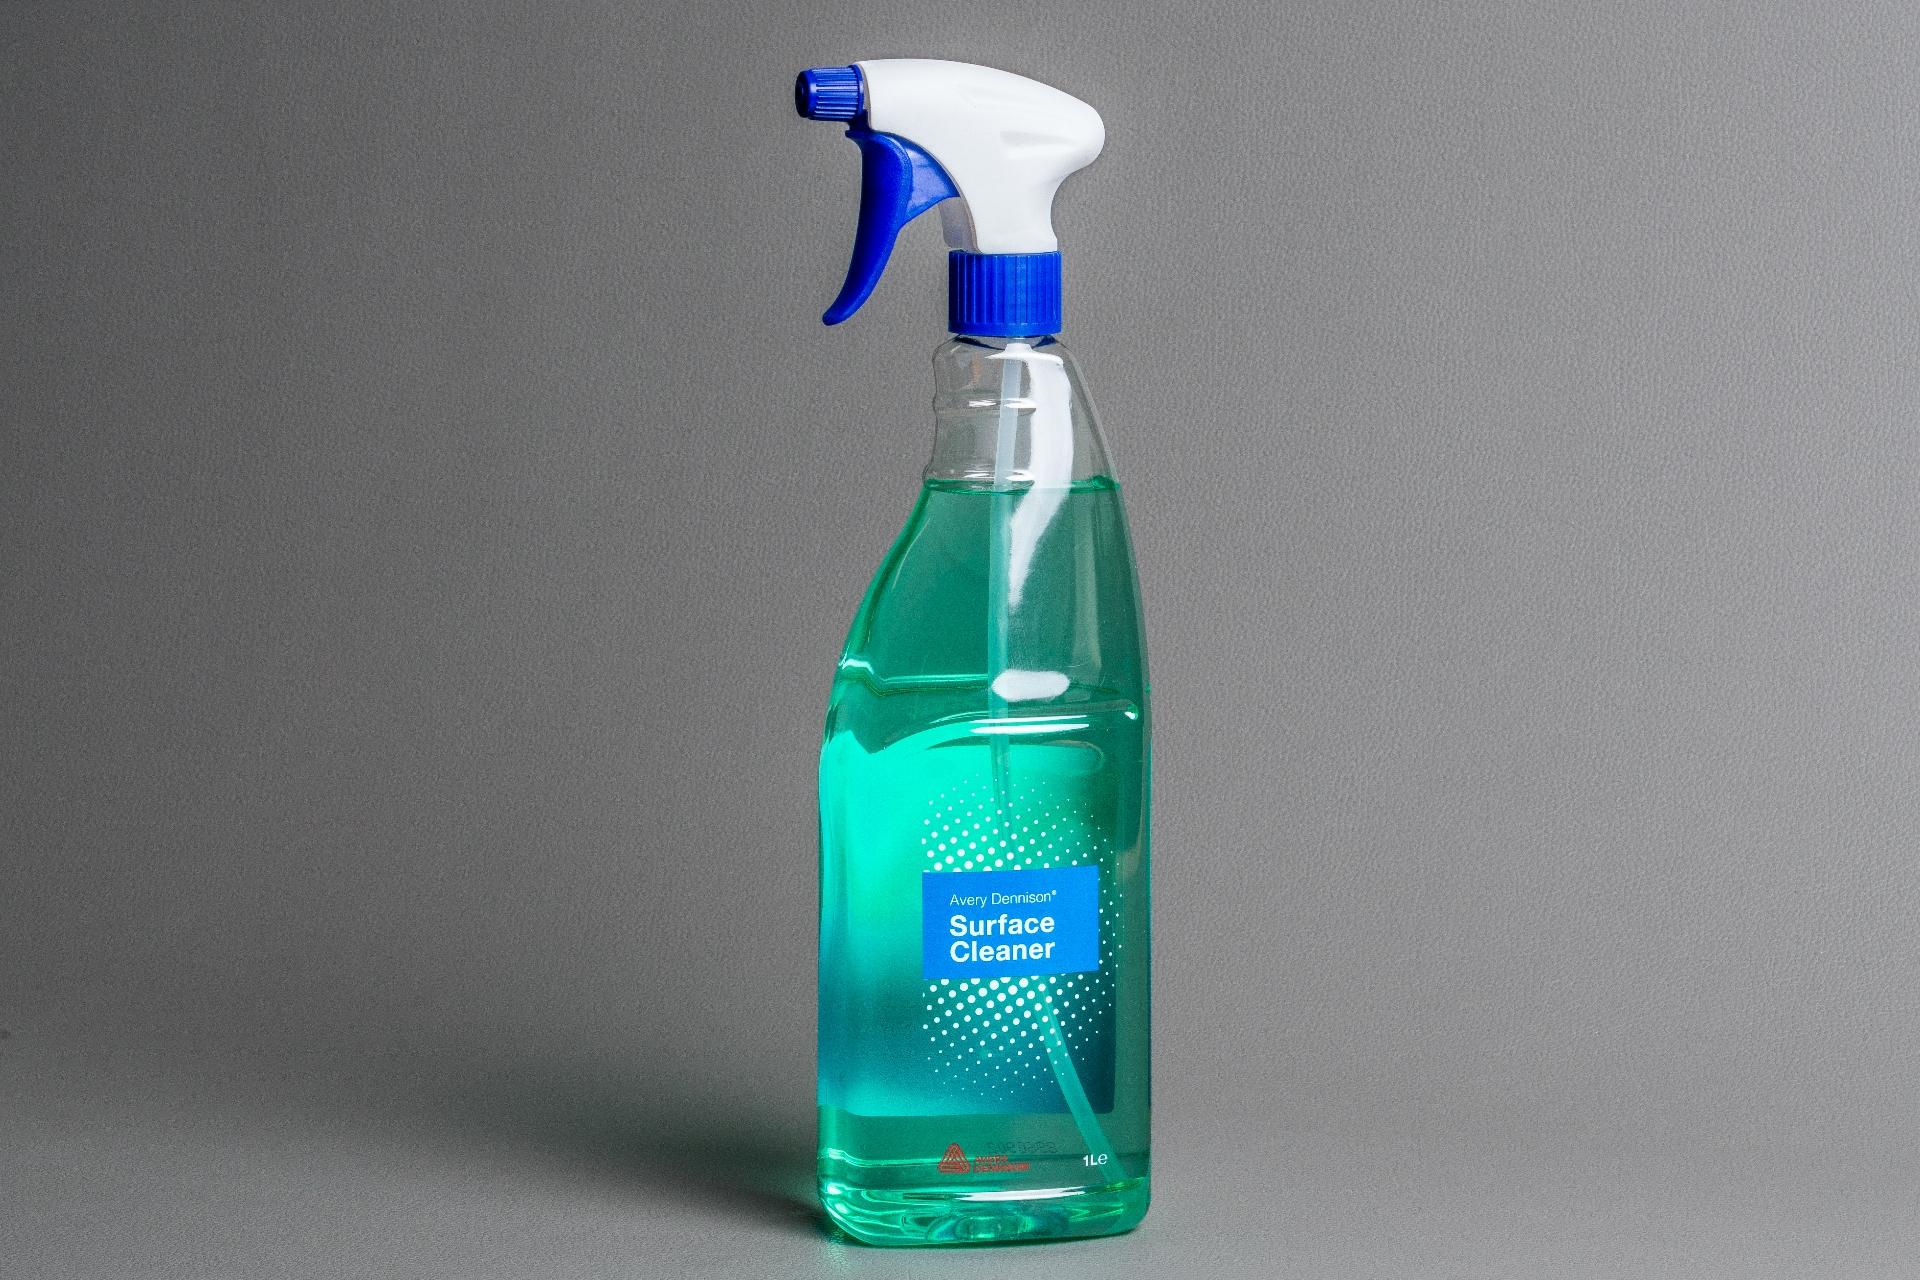 Foto: Avery Dennison Surface Cleaner - 1 ltr.